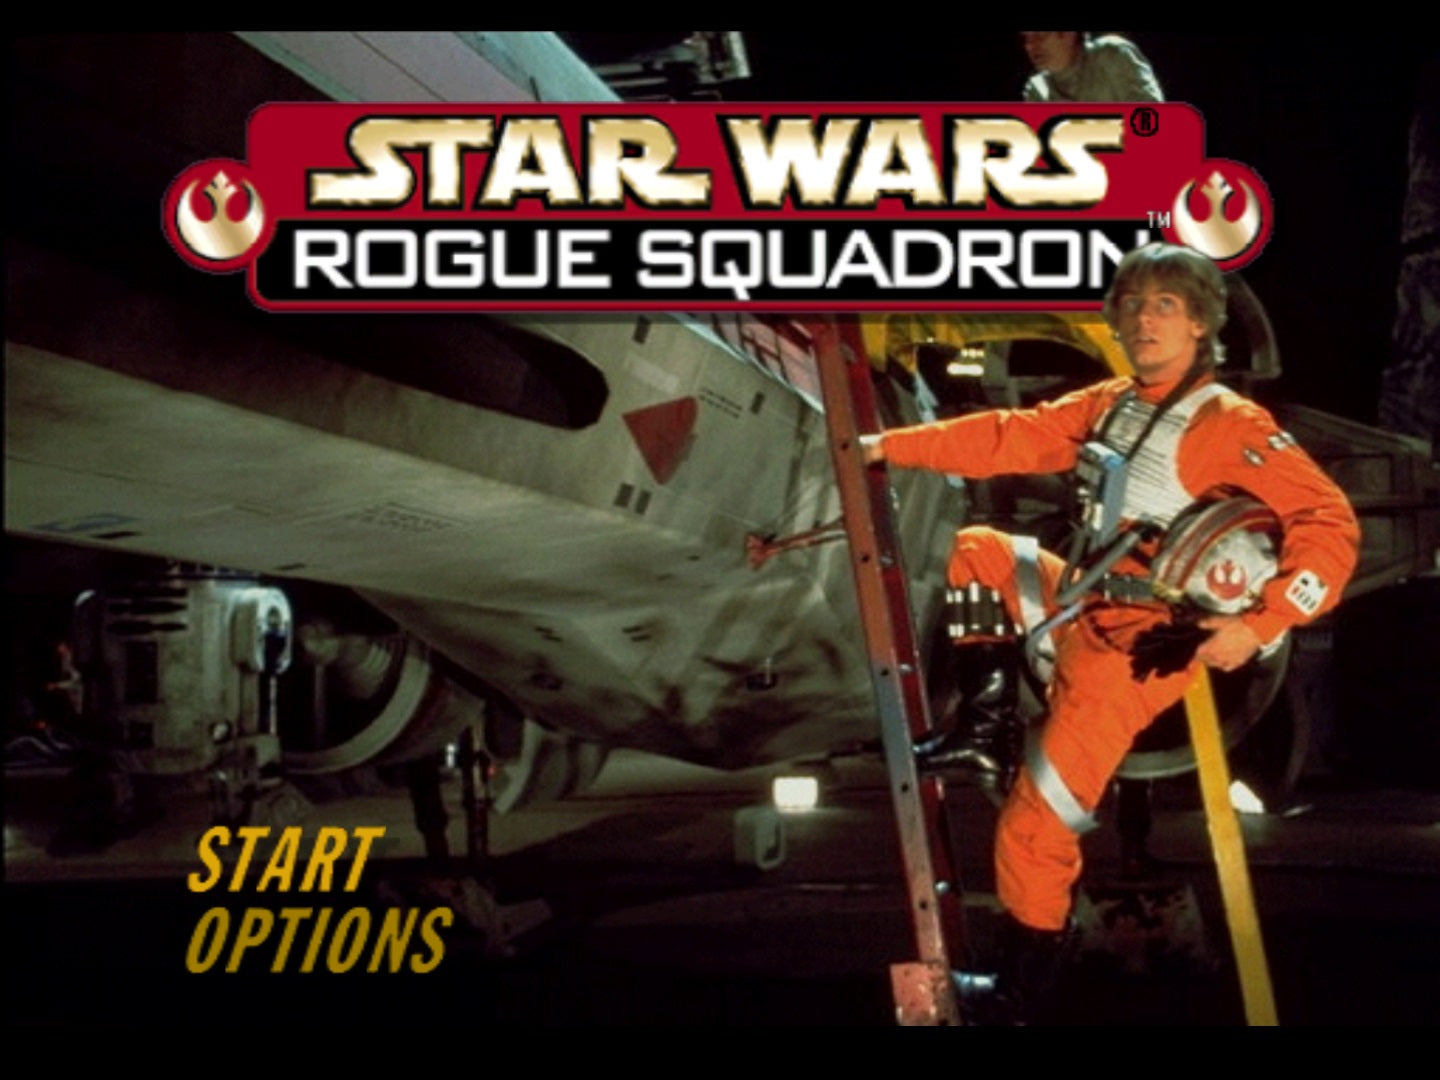 Star Wars: Rogue Squadron - Authentic Nintendo 64 (N64) Game Cartridge